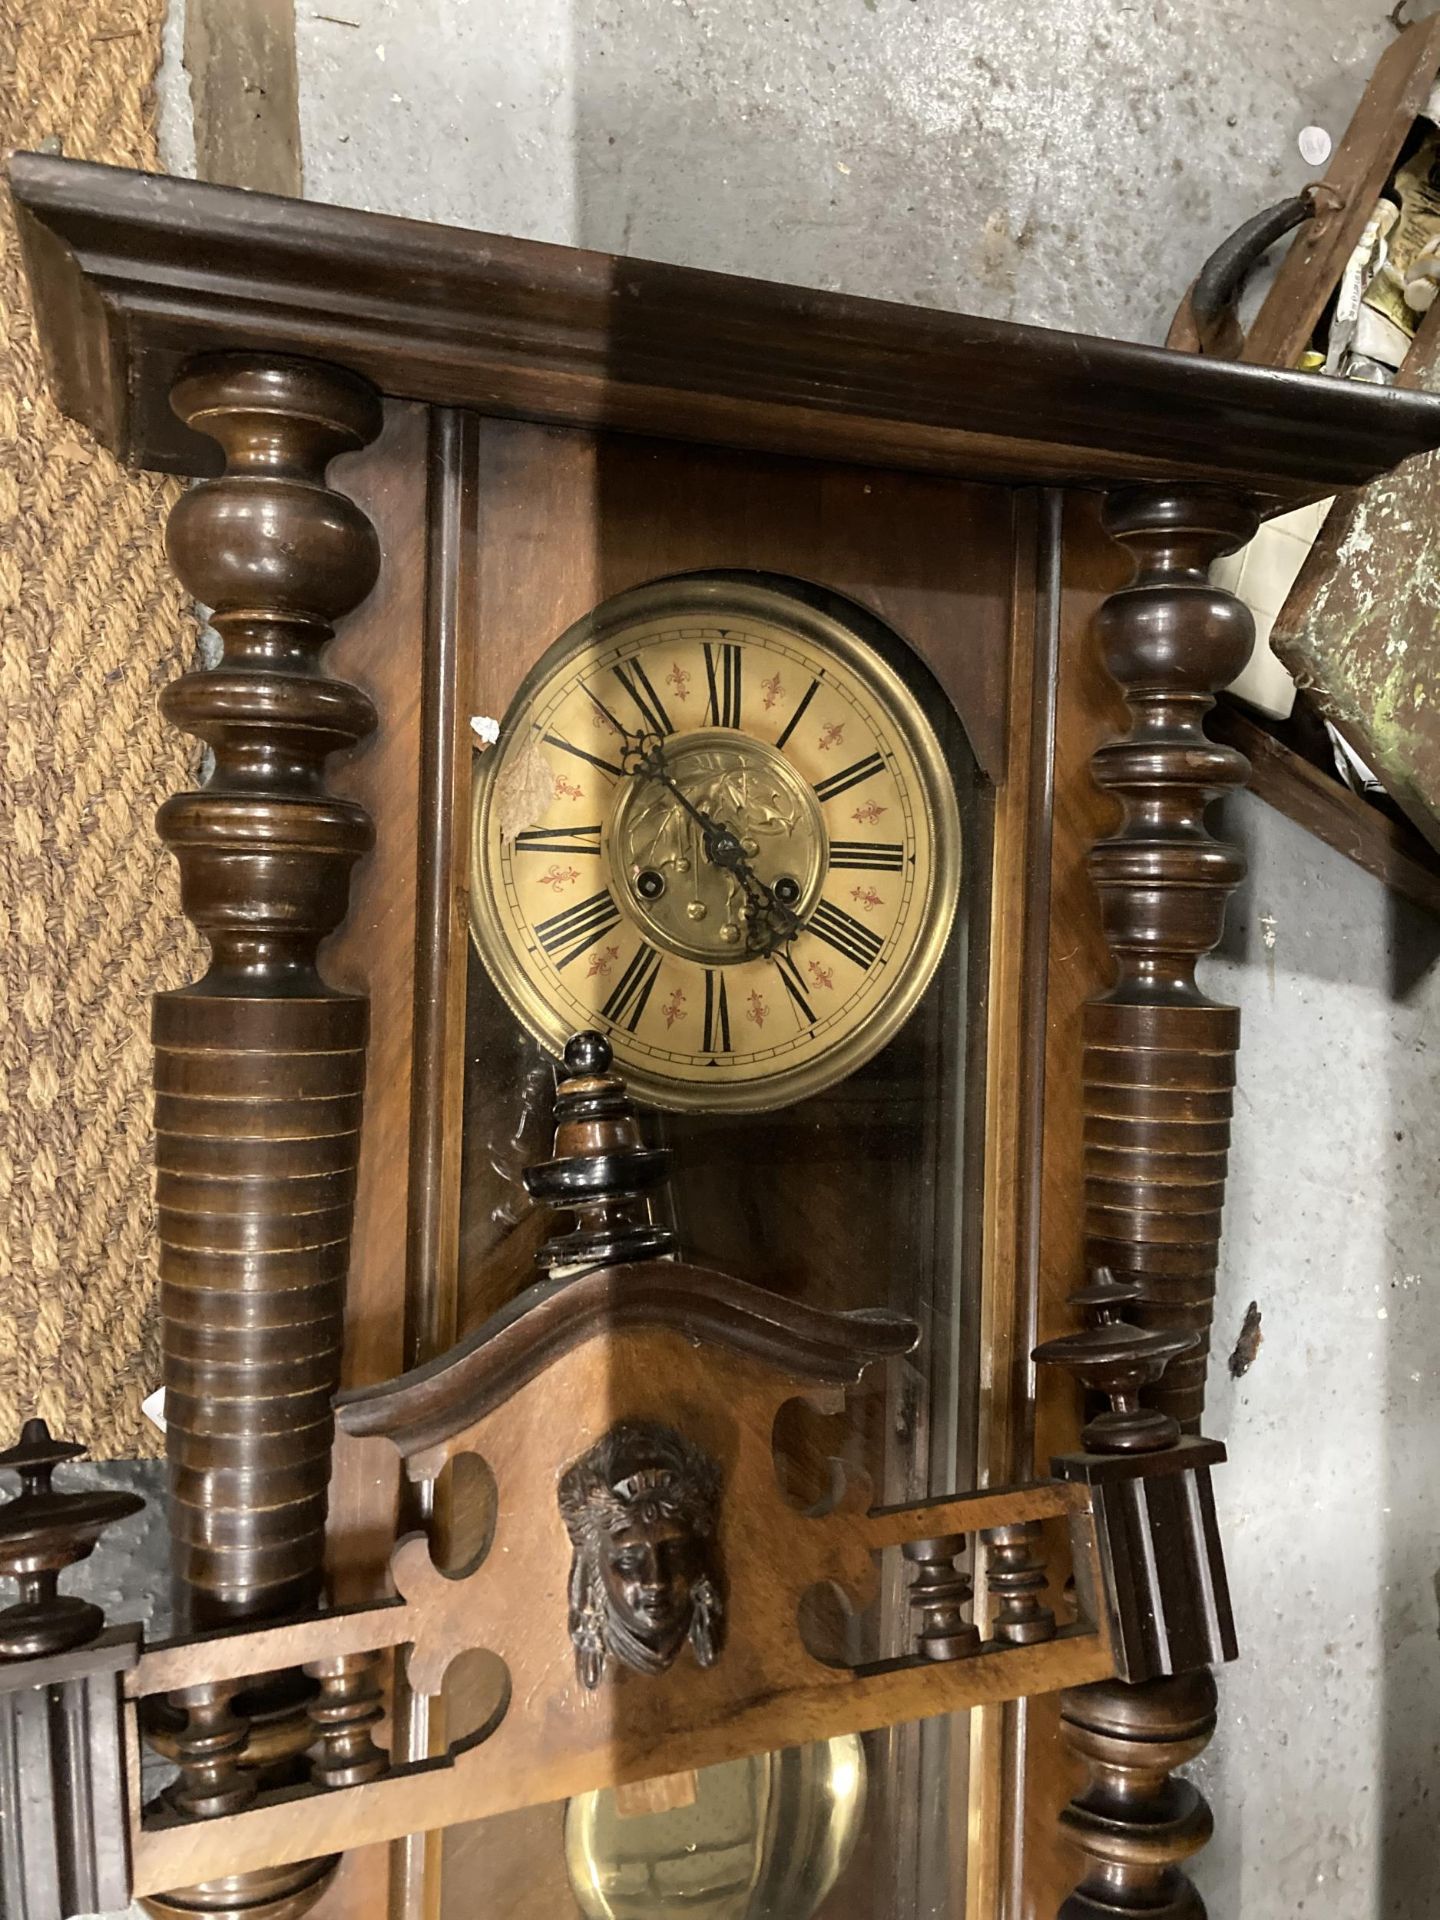 A CARVED WALNUT VIENNA WALL CLOCK WITH ROMAN NUMERALS AND PENDULUM - Image 2 of 4